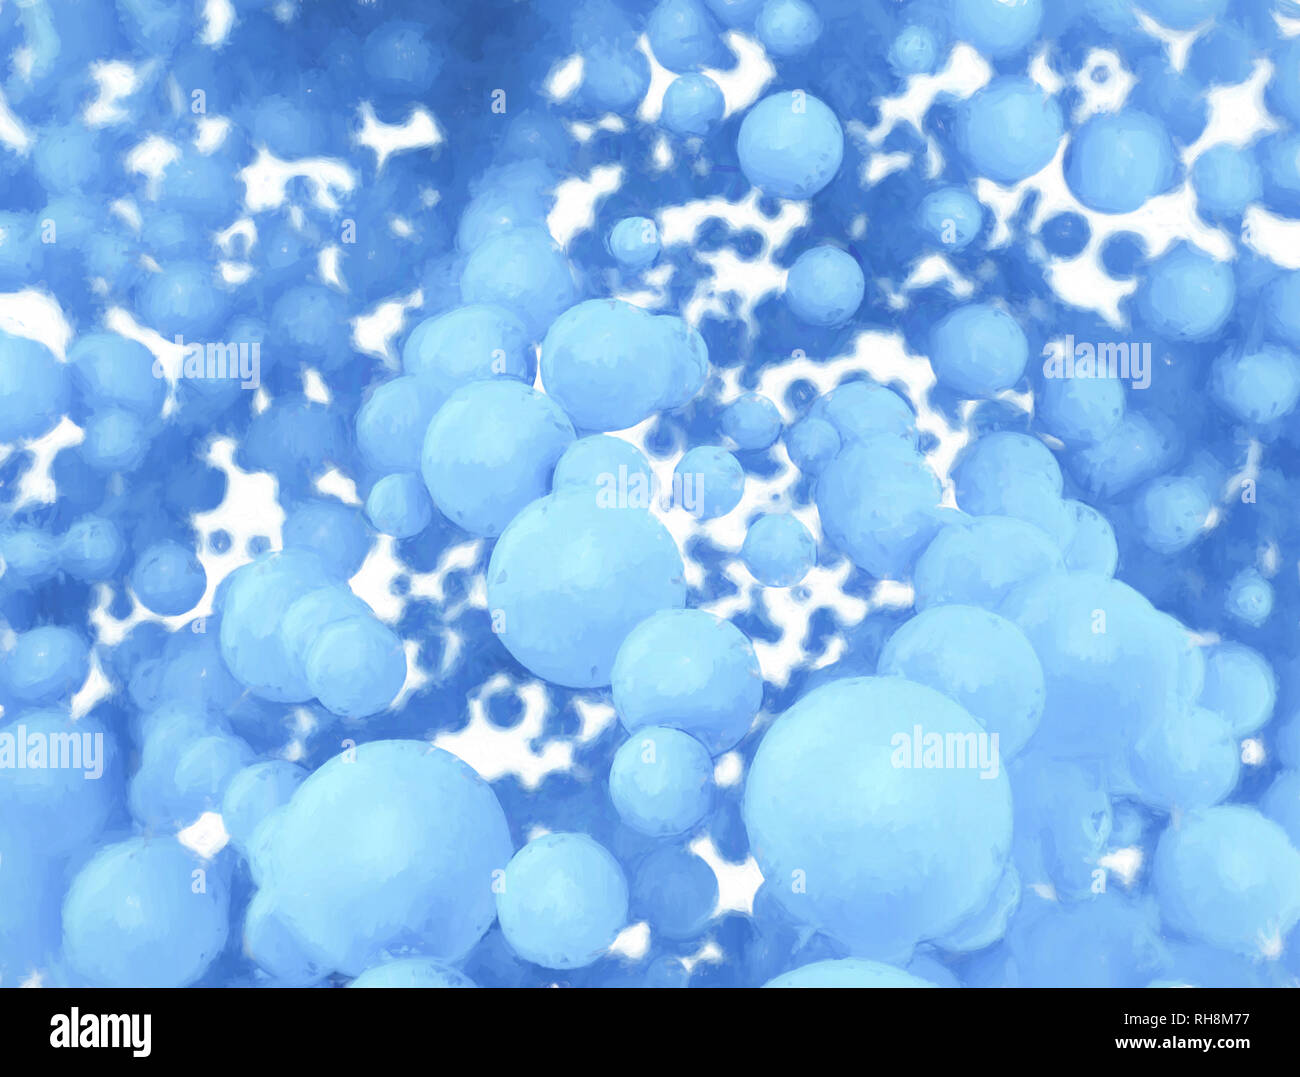 Abstract background 3d spheres Stock Photo